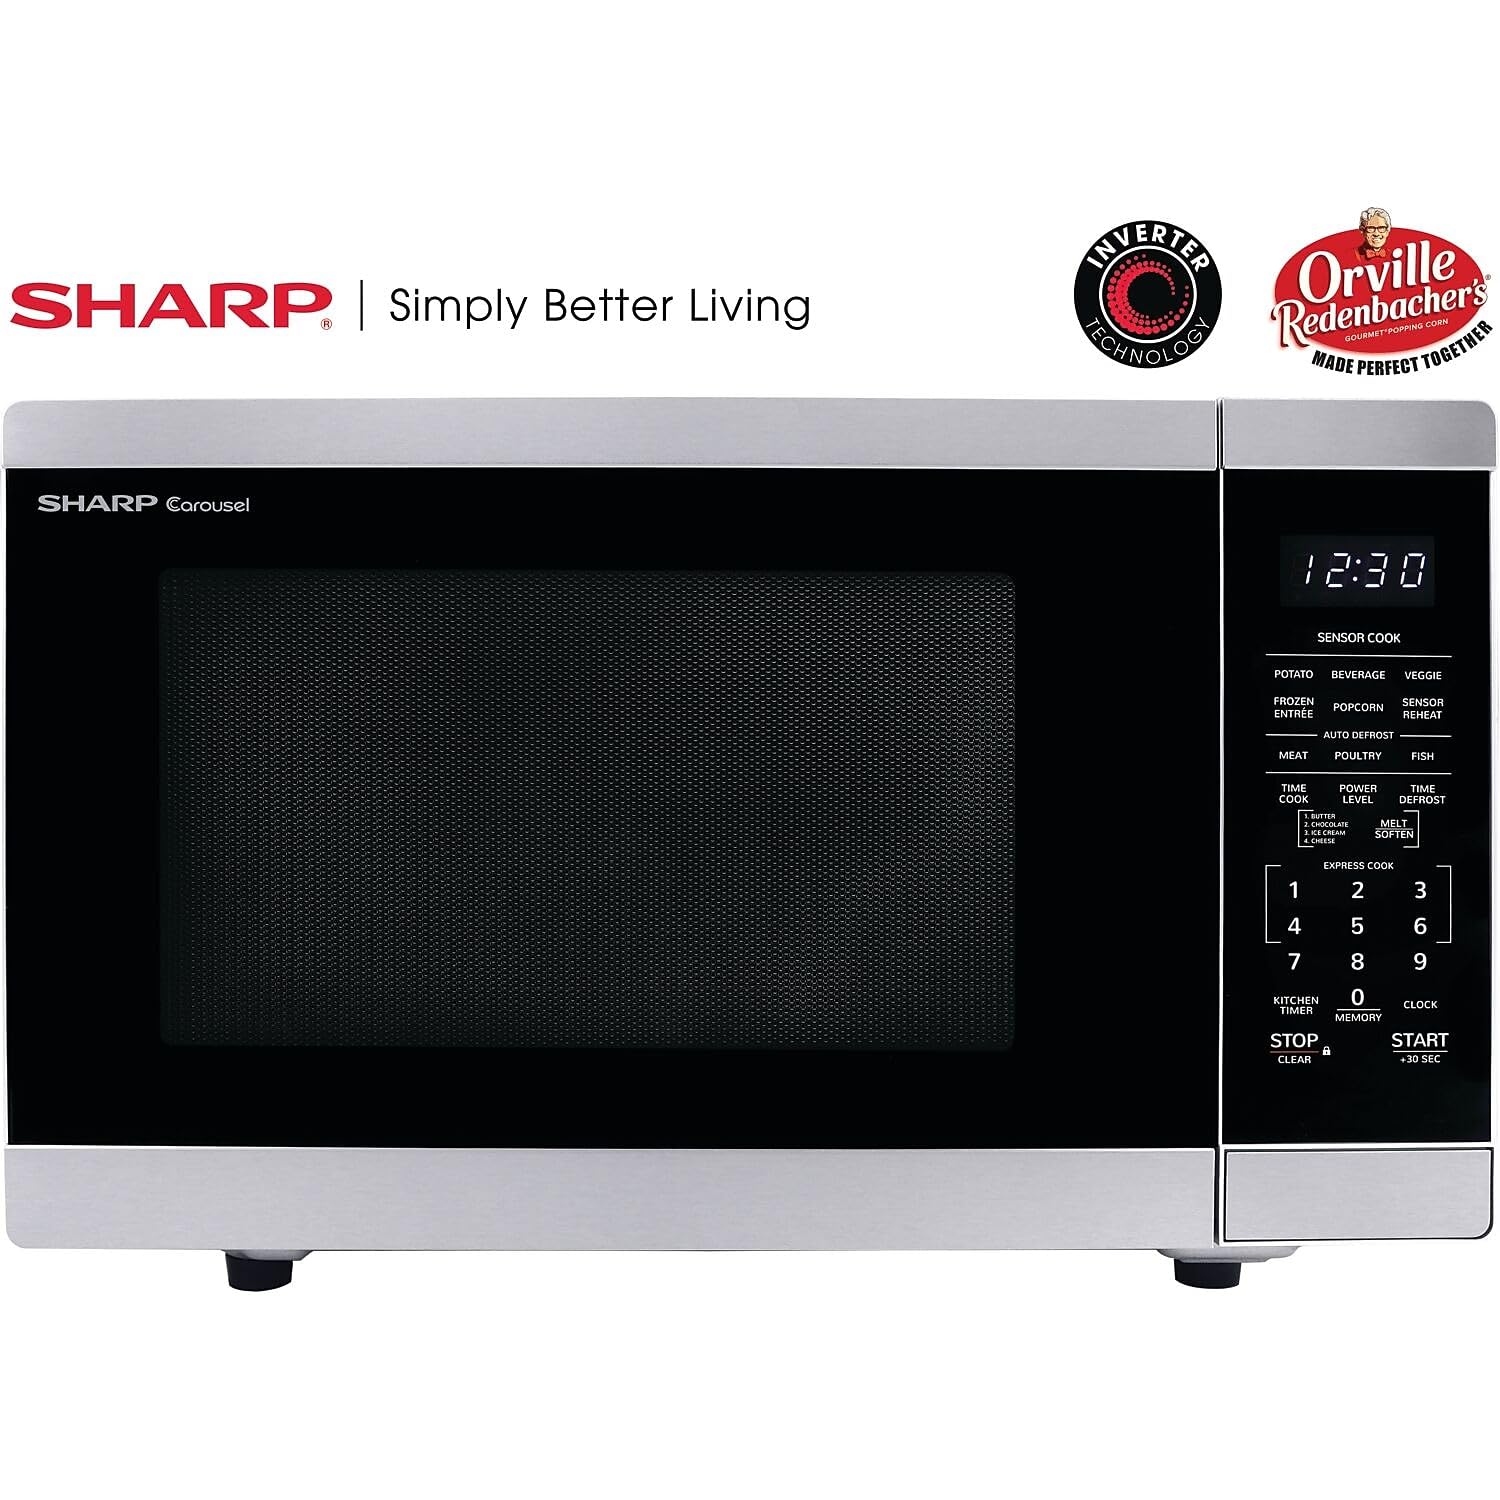 SHARP ZSMC1464HS Oven with Removable 12.4